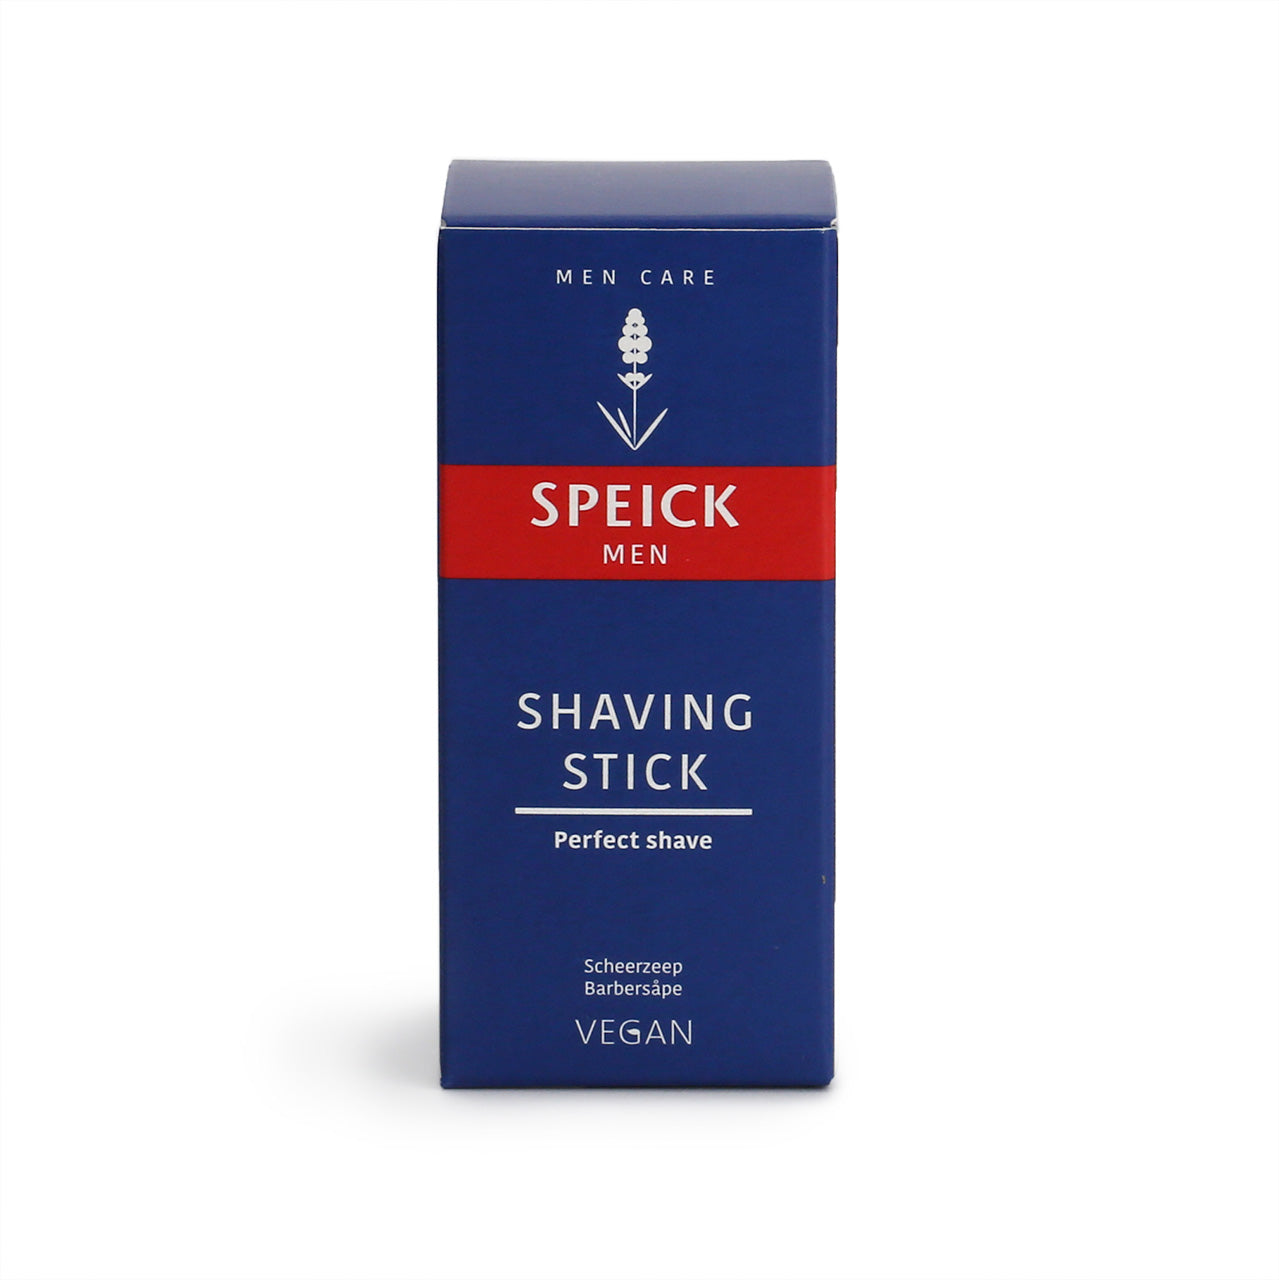 Speick Men Shaving stick blue and red packaging